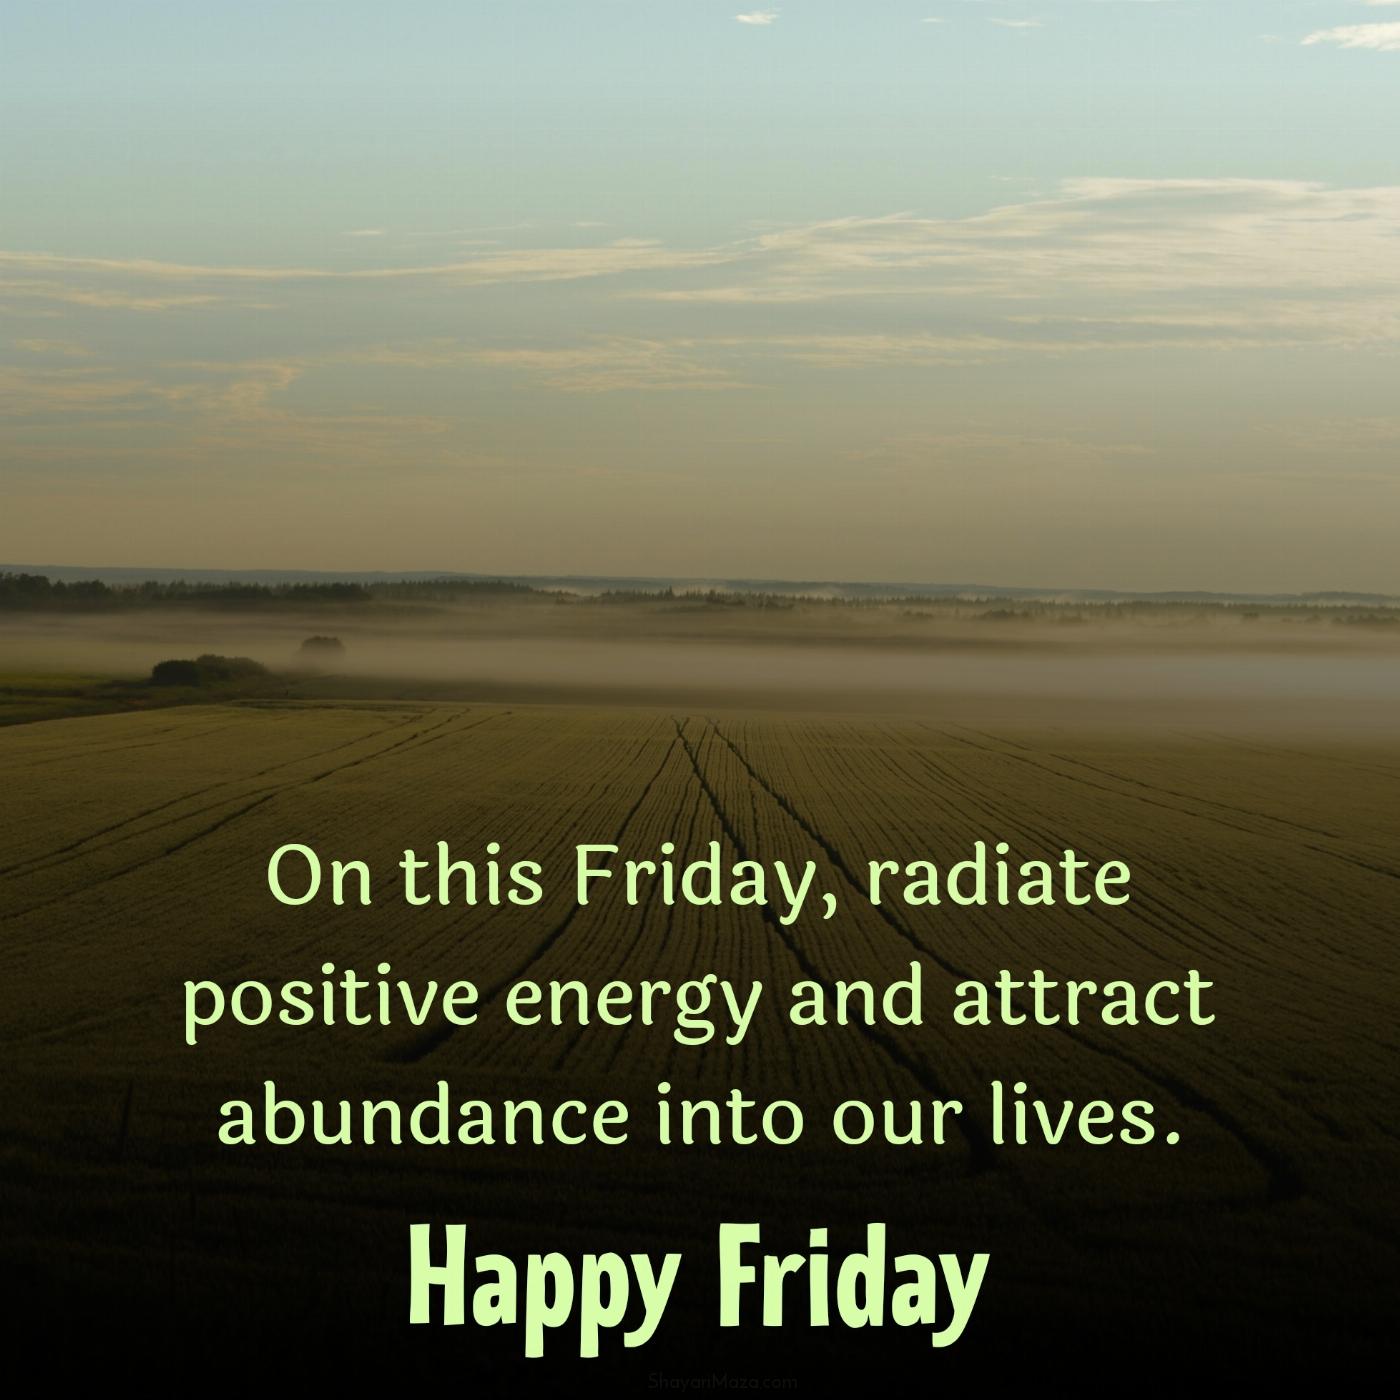 On this Friday radiate positive energy and attract abundance